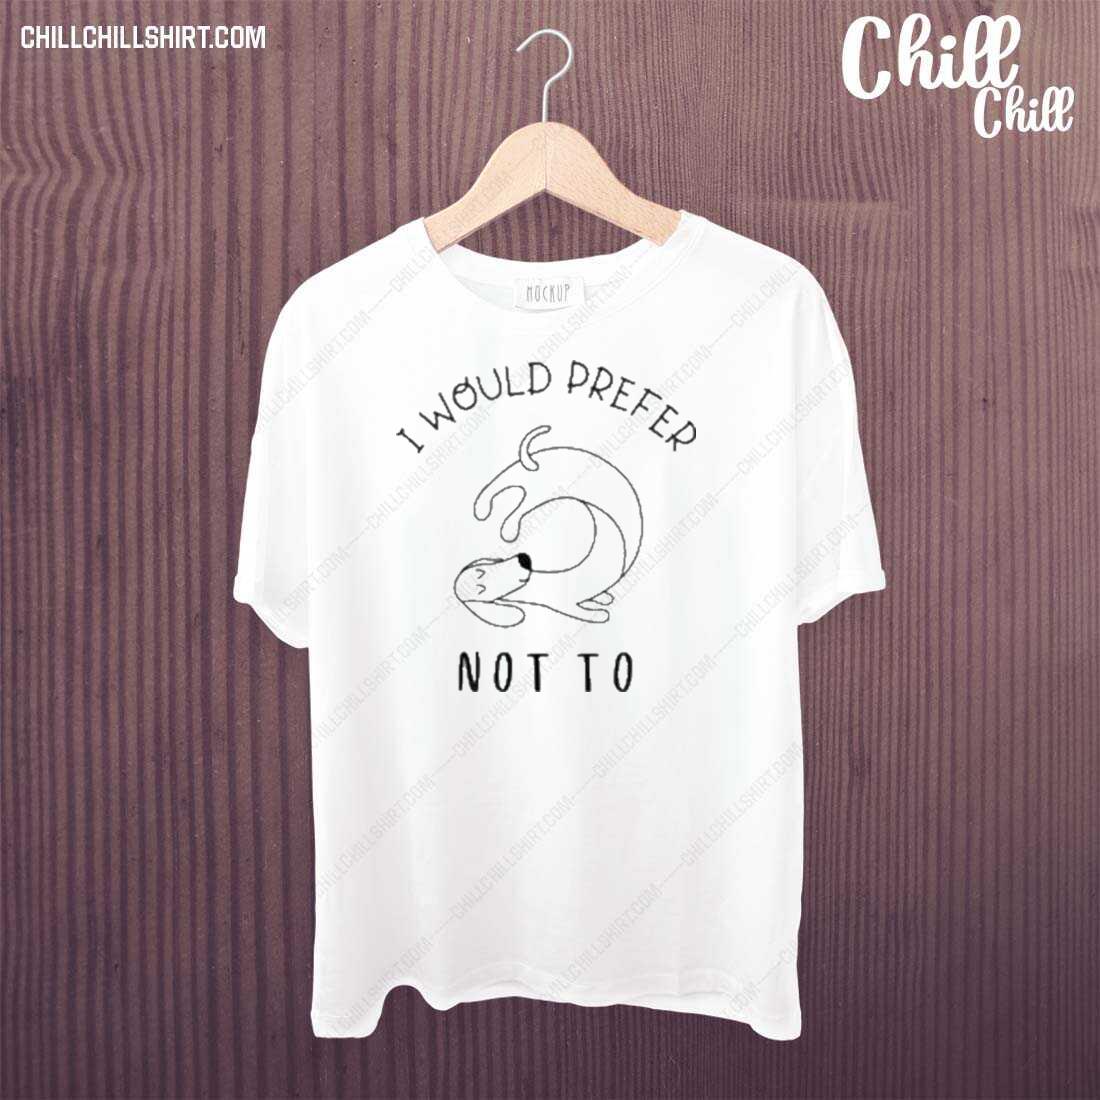 Official i Would Prefer Not To T-shirt